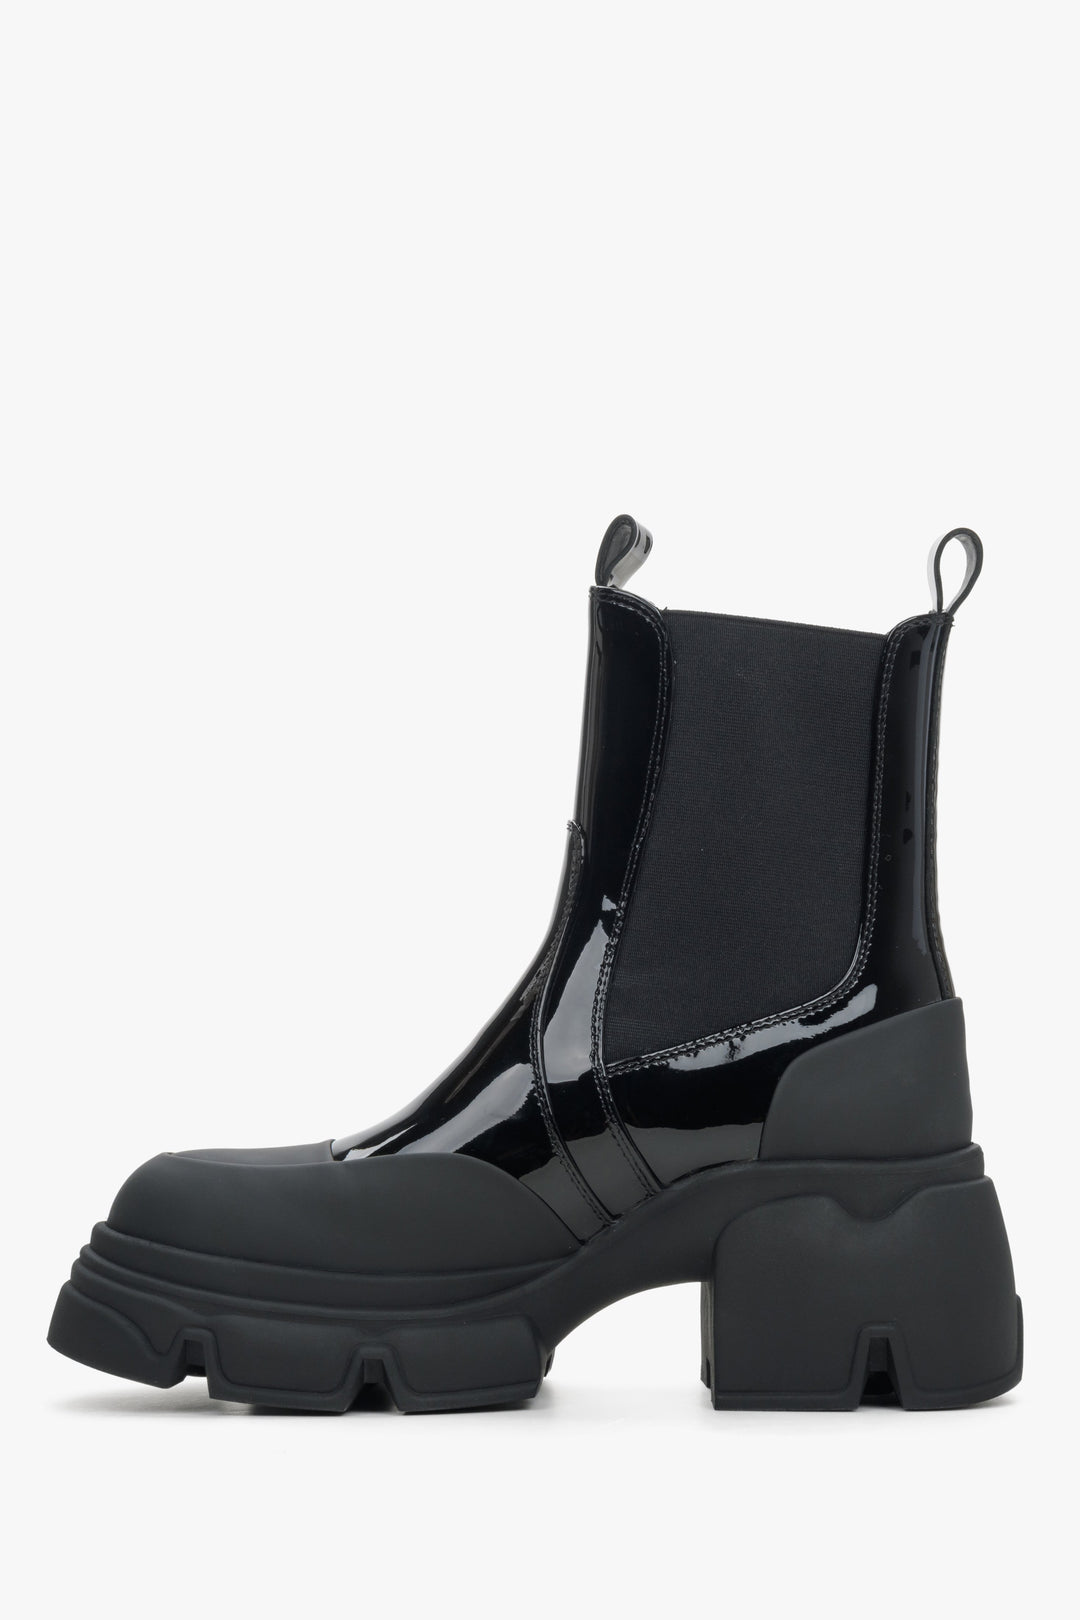 Women's black Chelsea boots by Estro made of patent natural leather - shoe profile.